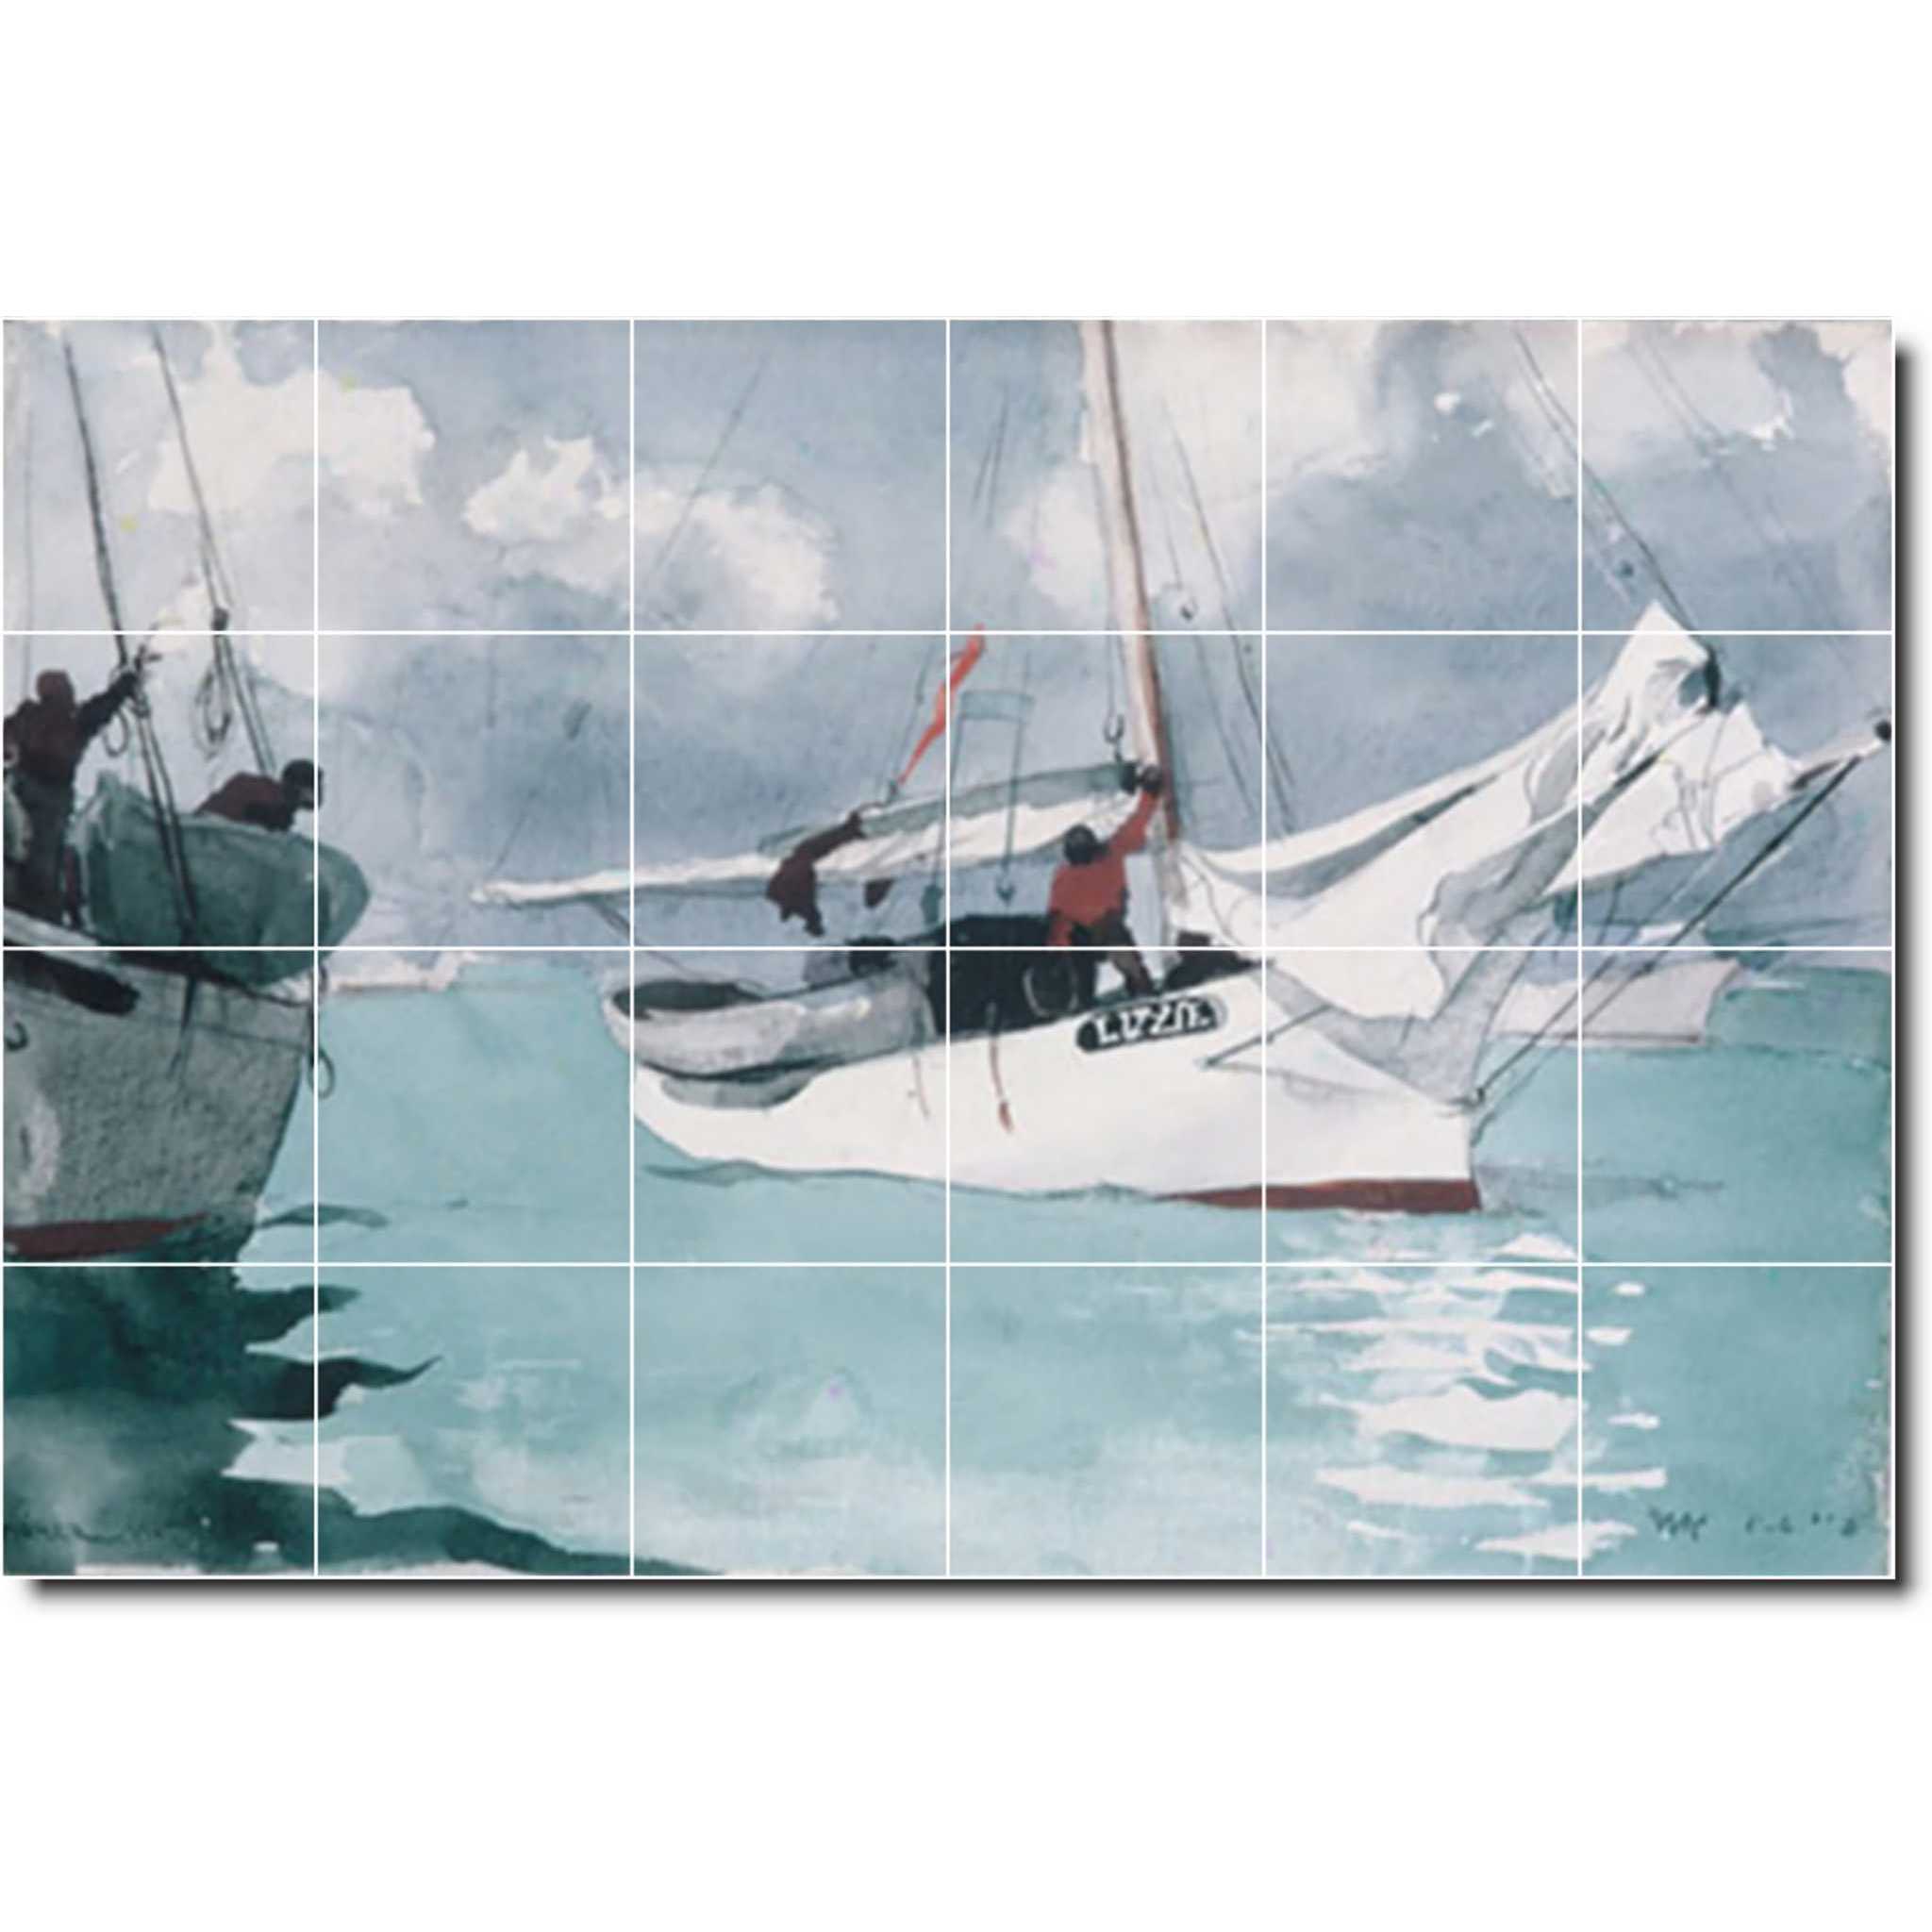 Winslow Homer Waterfront Painting Ceramic Tile Mural P04387-XL. 72"W x 48"H (24) 12x12 tiles